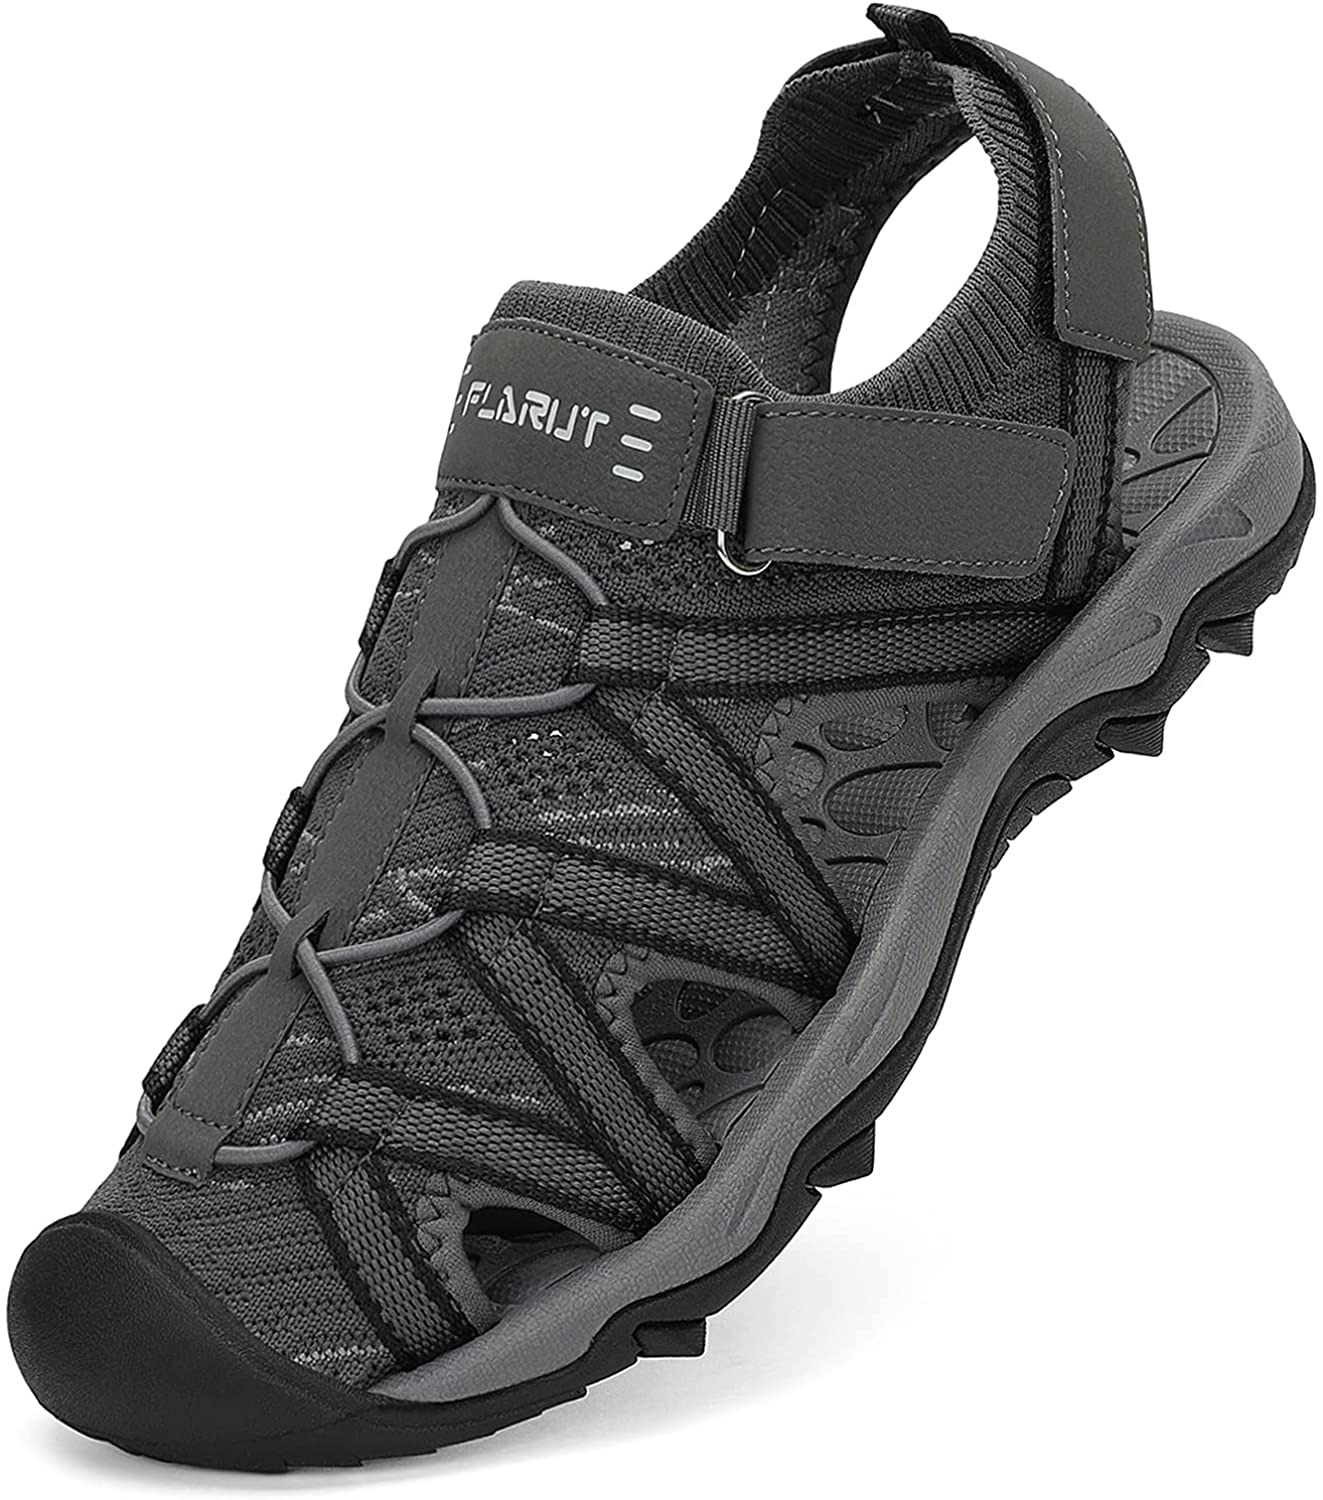 Buy Mens Hiking Sandals Sport Sandal Lightweight Trail Walking Shoes for  Beach Water Arch Support Online at Lowest Price Ever in India | Check  Reviews & Ratings - Shop The World